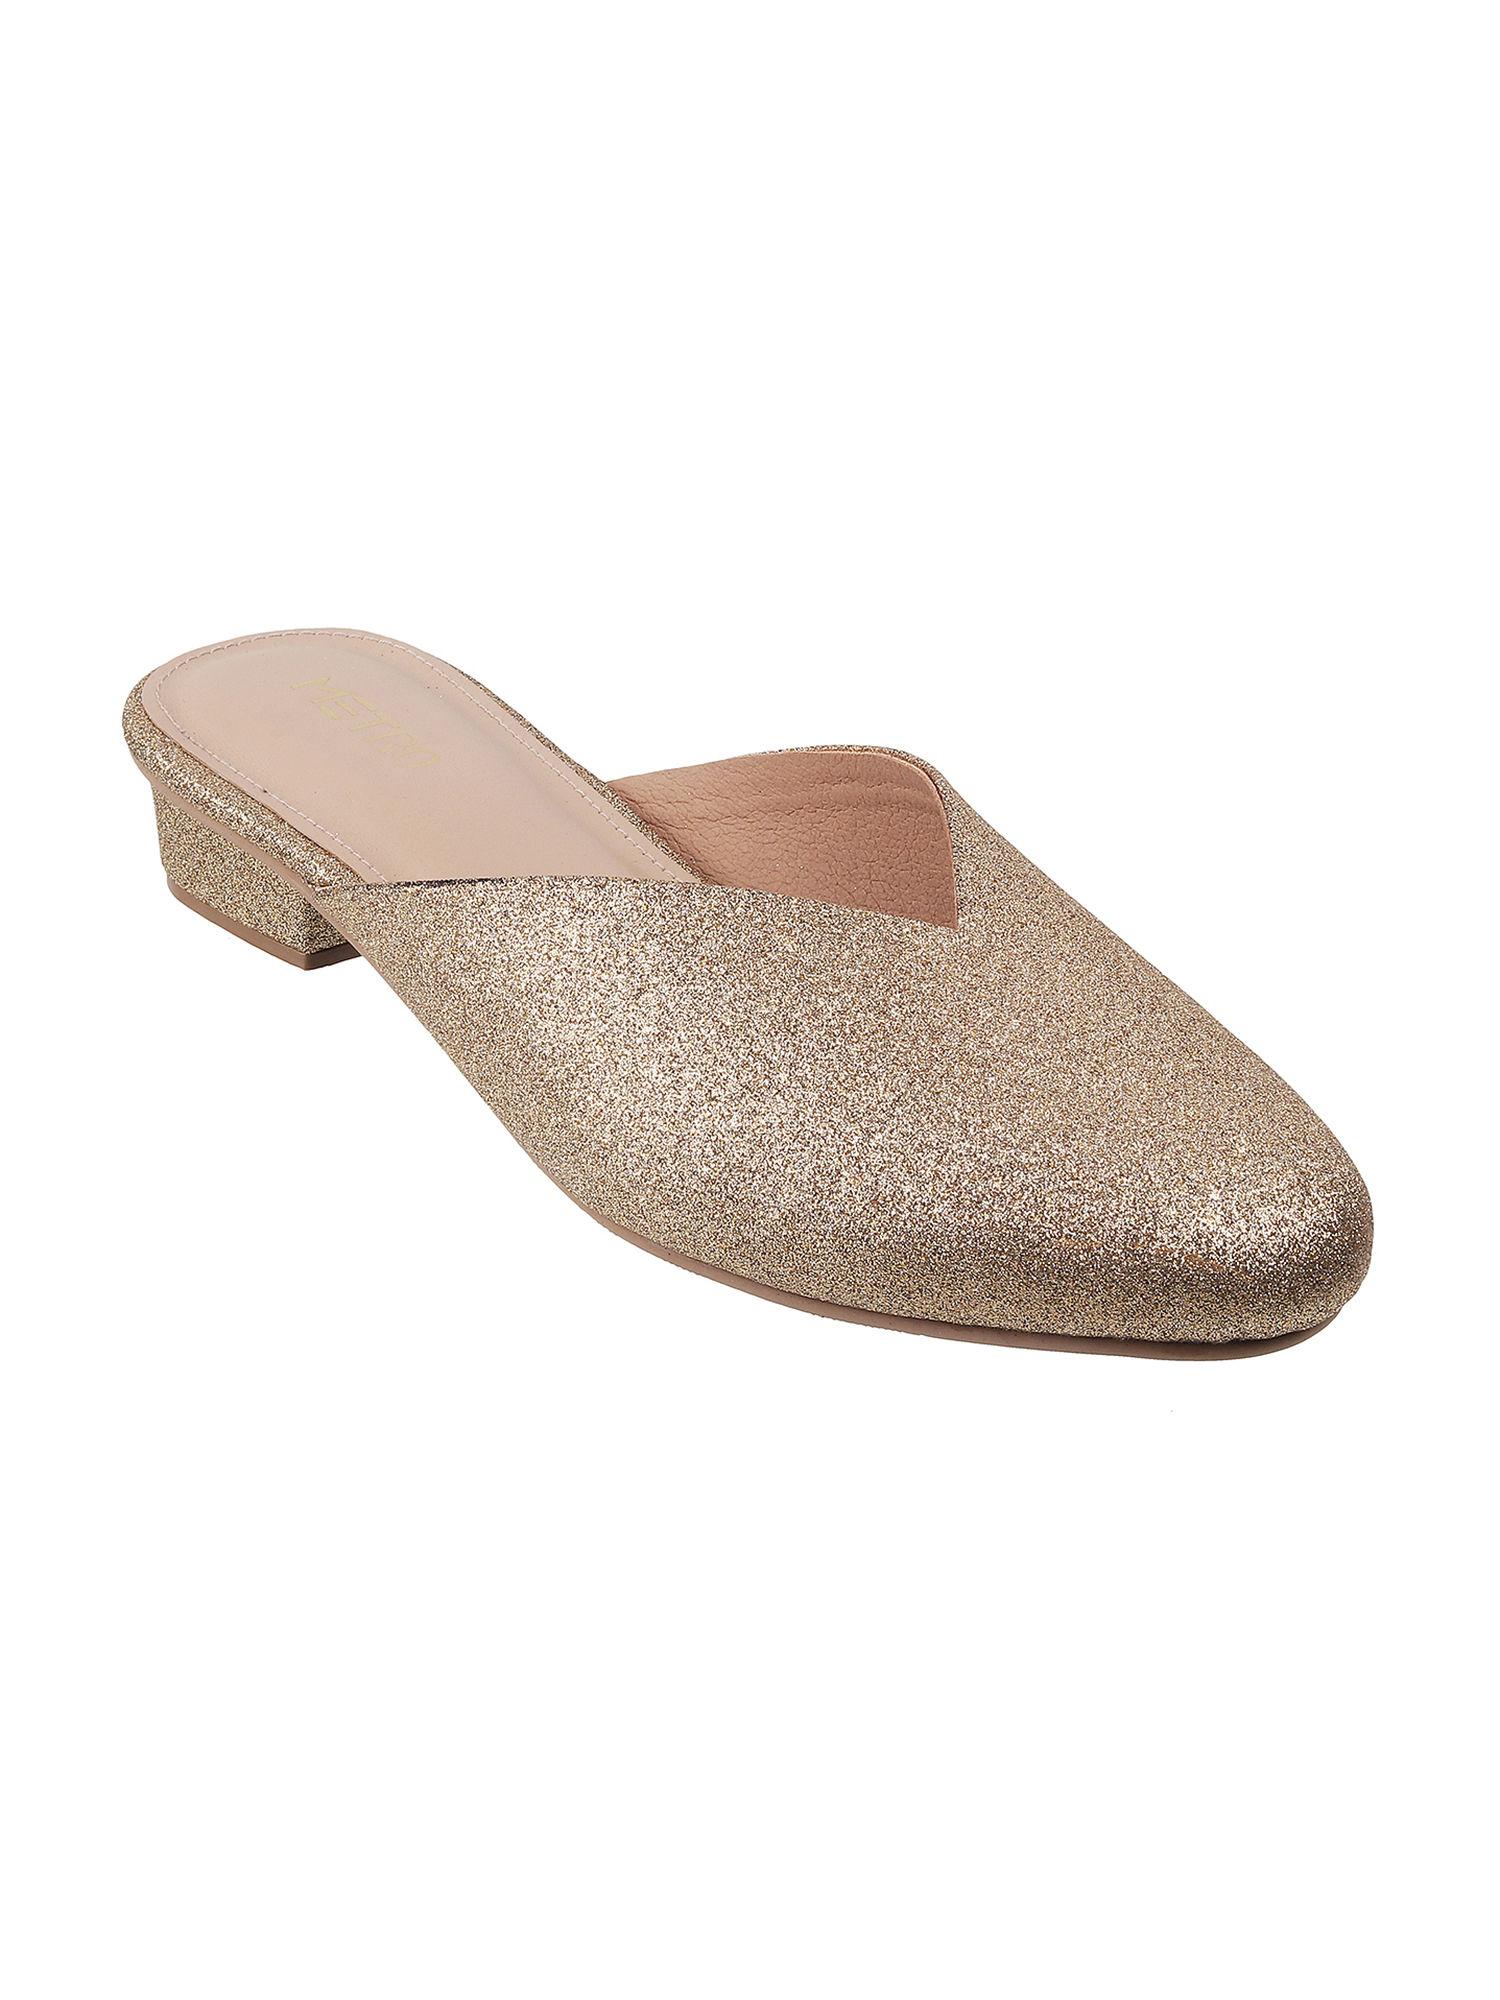 womens gold mules metro embellished gold mules